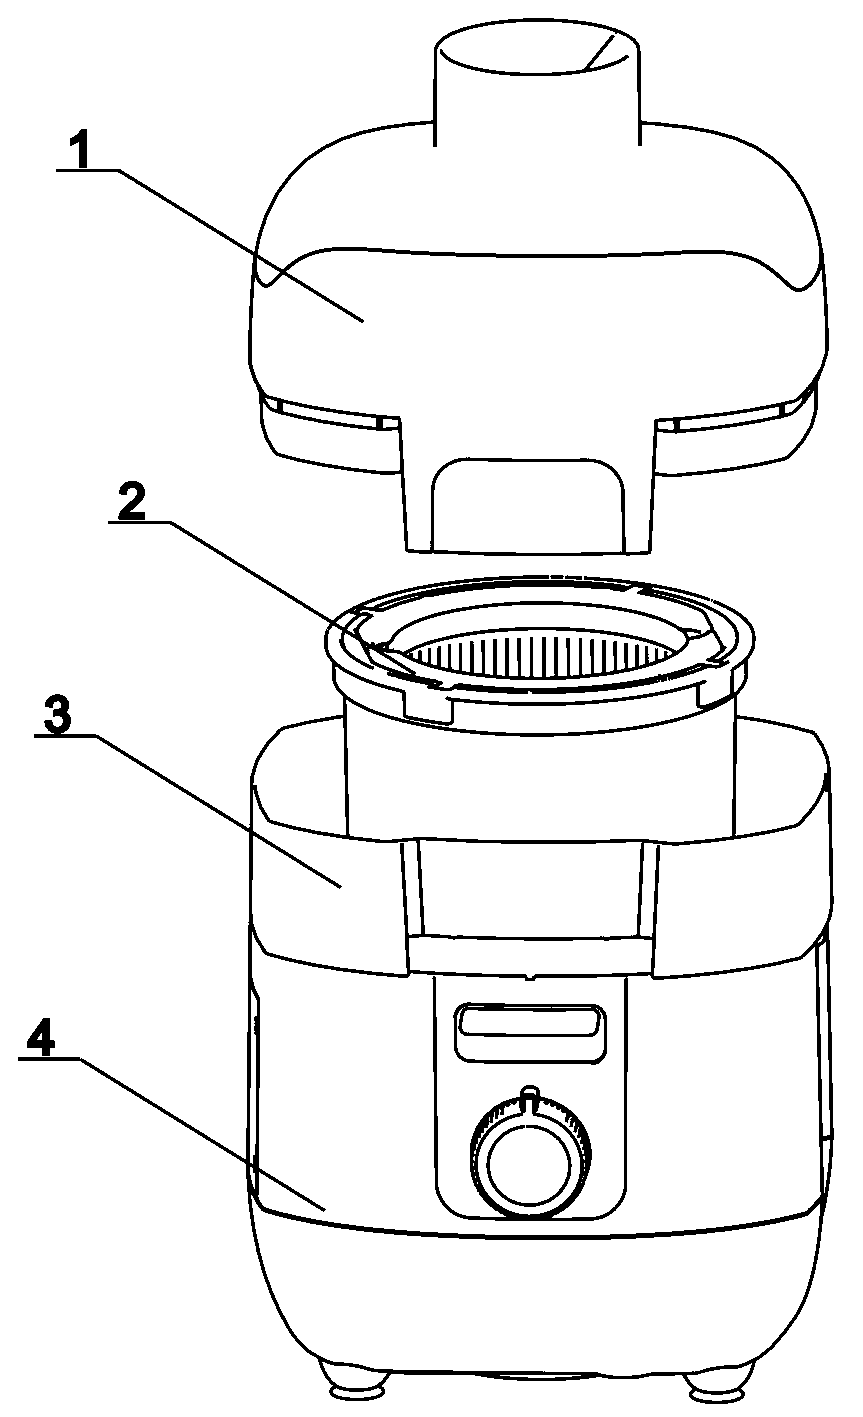 Juicer capable of automatically discharging residues